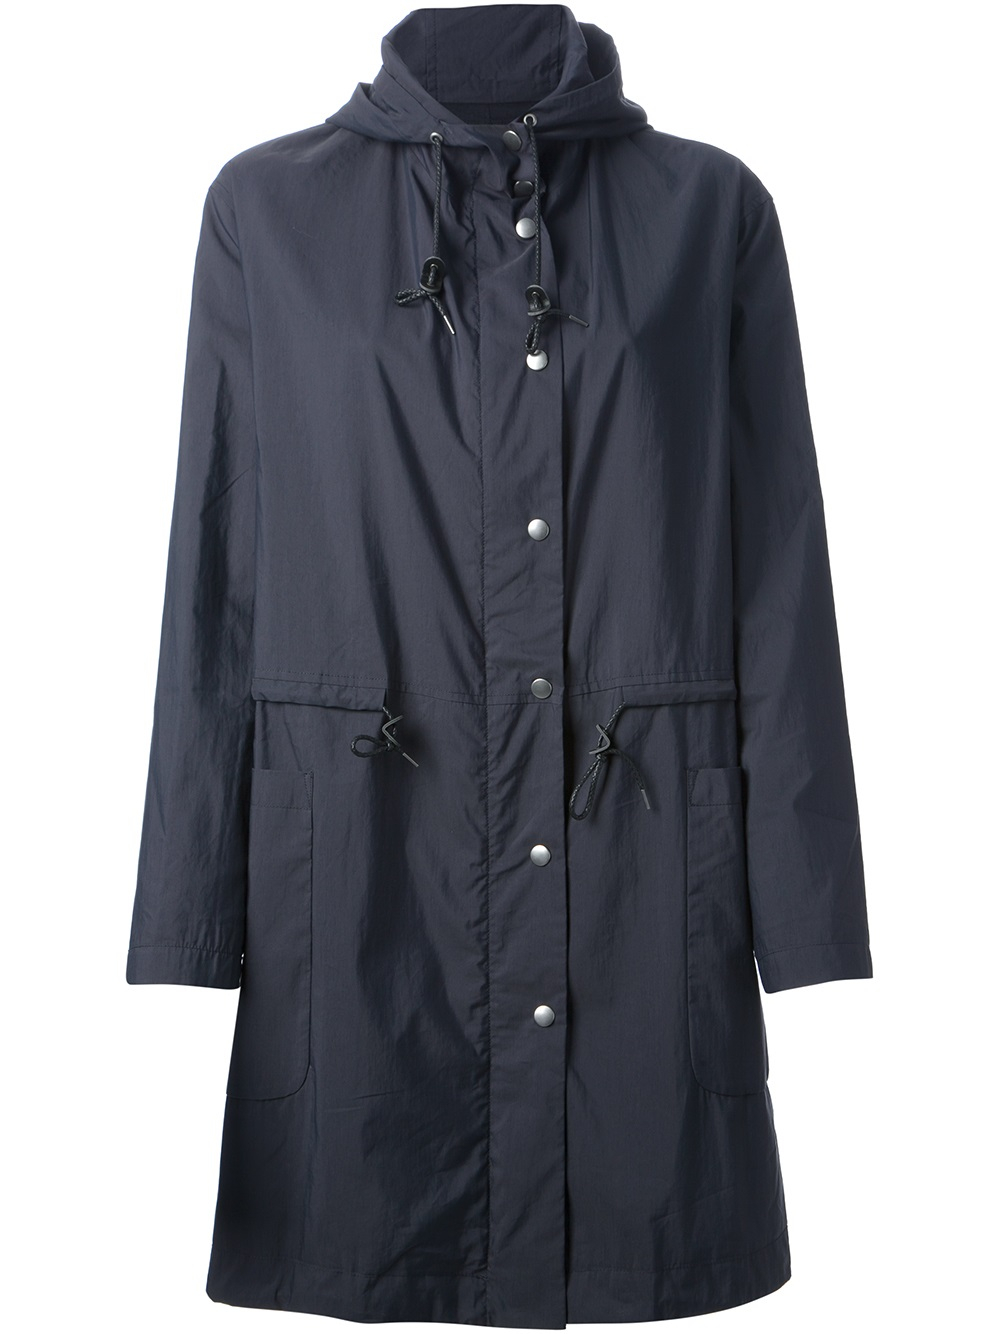 Lyst - Theory Hooded Trench Coat in Blue